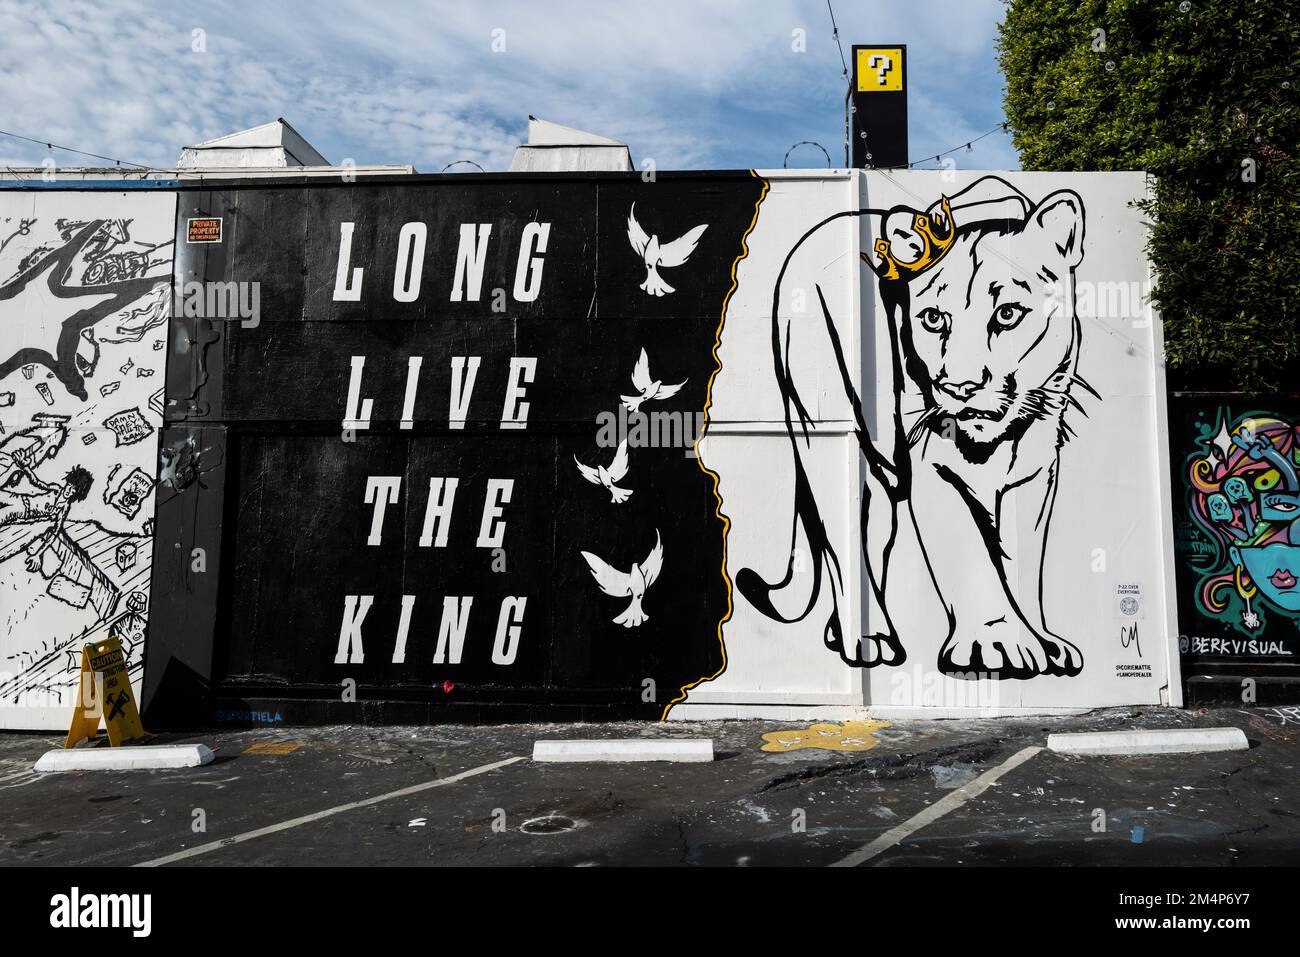 Los Angeles, USA. 22nd Dec, 2022. A mural dedicated to P-22, a wild mountain lion living in the Hollywood Hills. P-22 was the beloved unofficial mascot of Los Angeles. This mural was painted by artist Corie Mattie who encountered the mountain lion in the hills above LA. P-22 was euthanized earlier last week after suffering from injuries from getting hit by a vehicle. 12/22/2022 Los Angeles, CA., USA. (Photo by Ted Soqui/SIPA USA) Credit: Sipa USA/Alamy Live News Stock Photo